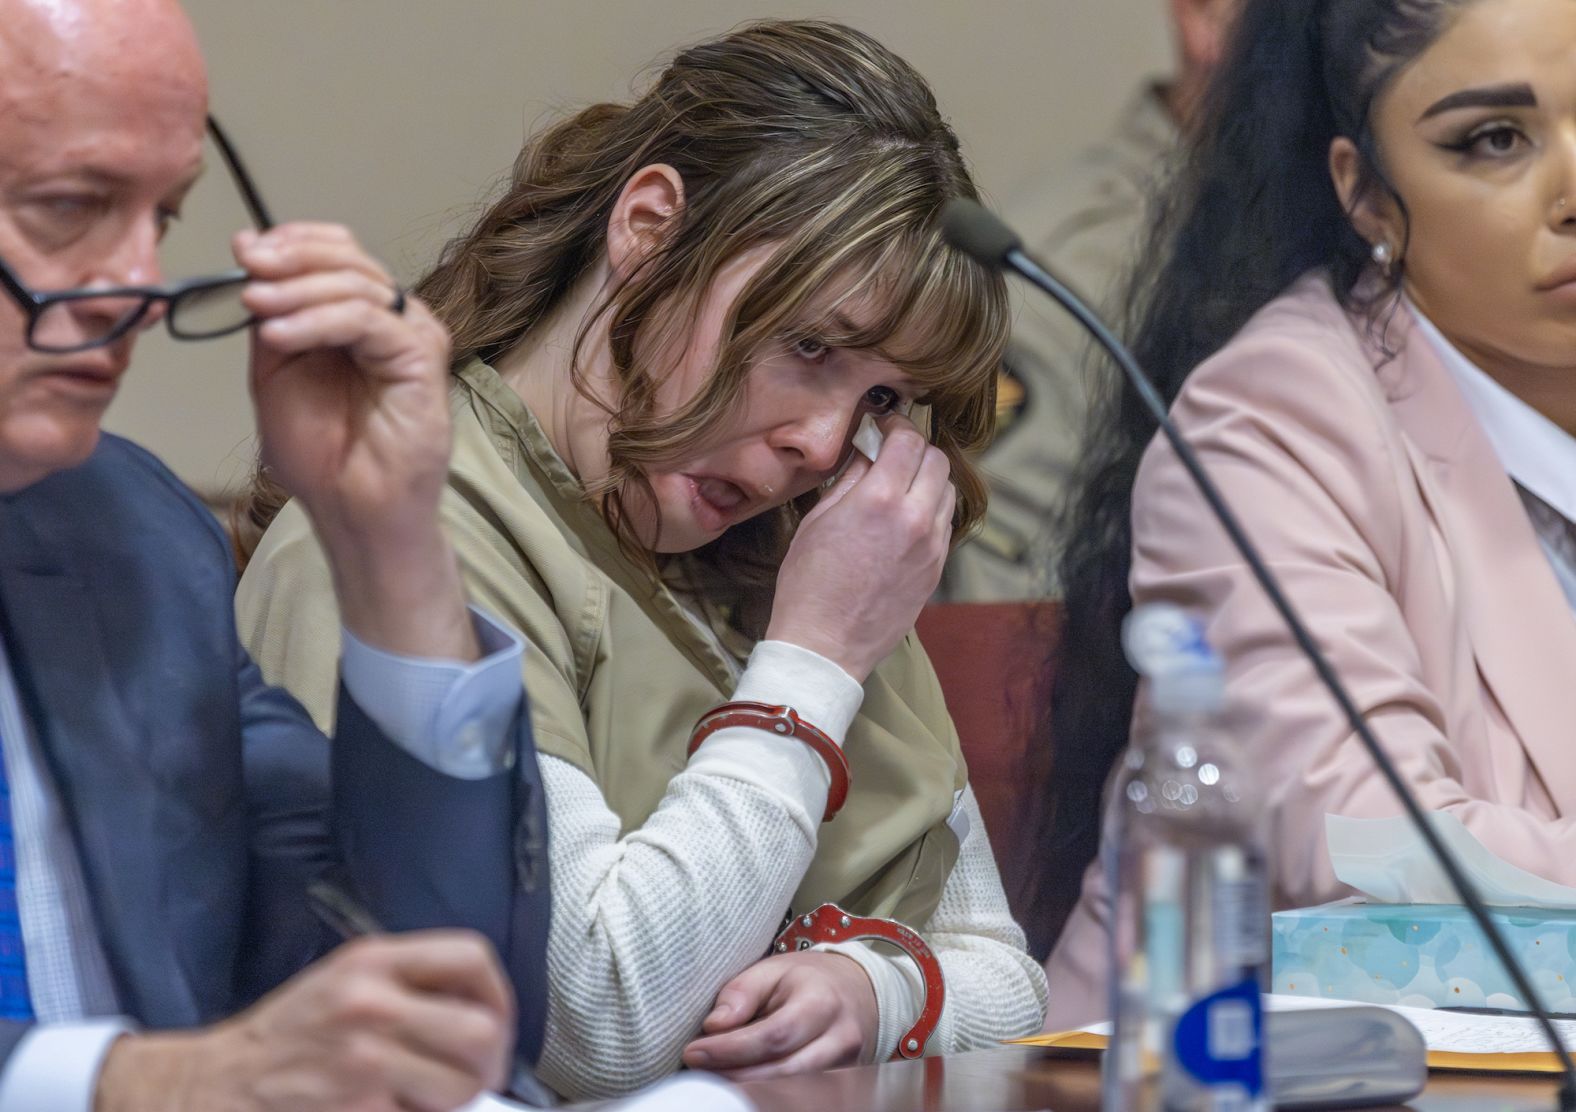 Rust armorer Hannah Gutierrez Reed wipes her tears during her sentencing in Santa Fe, New Mexico, on Monday, April 15. Gutierrez Reed, who was <a href="index.php?page=&url=https%3A%2F%2Fwww.cnn.com%2F2024%2F03%2F06%2Fentertainment%2Frust-trial-hannah-gutierrez-reed%2Findex.html" target="_blank">found guilty of involuntary manslaughter</a> last month for the 2021 on-set fatal shooting of <a href="index.php?page=&url=https%3A%2F%2Fwww.cnn.com%2F2023%2F01%2F19%2Fentertainment%2Fhalyna-hutchins-remembered%2Findex.html" target="_blank">cinematographer Halyna Hutchins</a>, was <a href="index.php?page=&url=https%3A%2F%2Fwww.cnn.com%2F2024%2F04%2F15%2Fentertainment%2Frust-film-shooting-armorer-sentencing%2Findex.html" target="_blank">sentenced to 18 months in prison</a>, the maximum possible punishment.